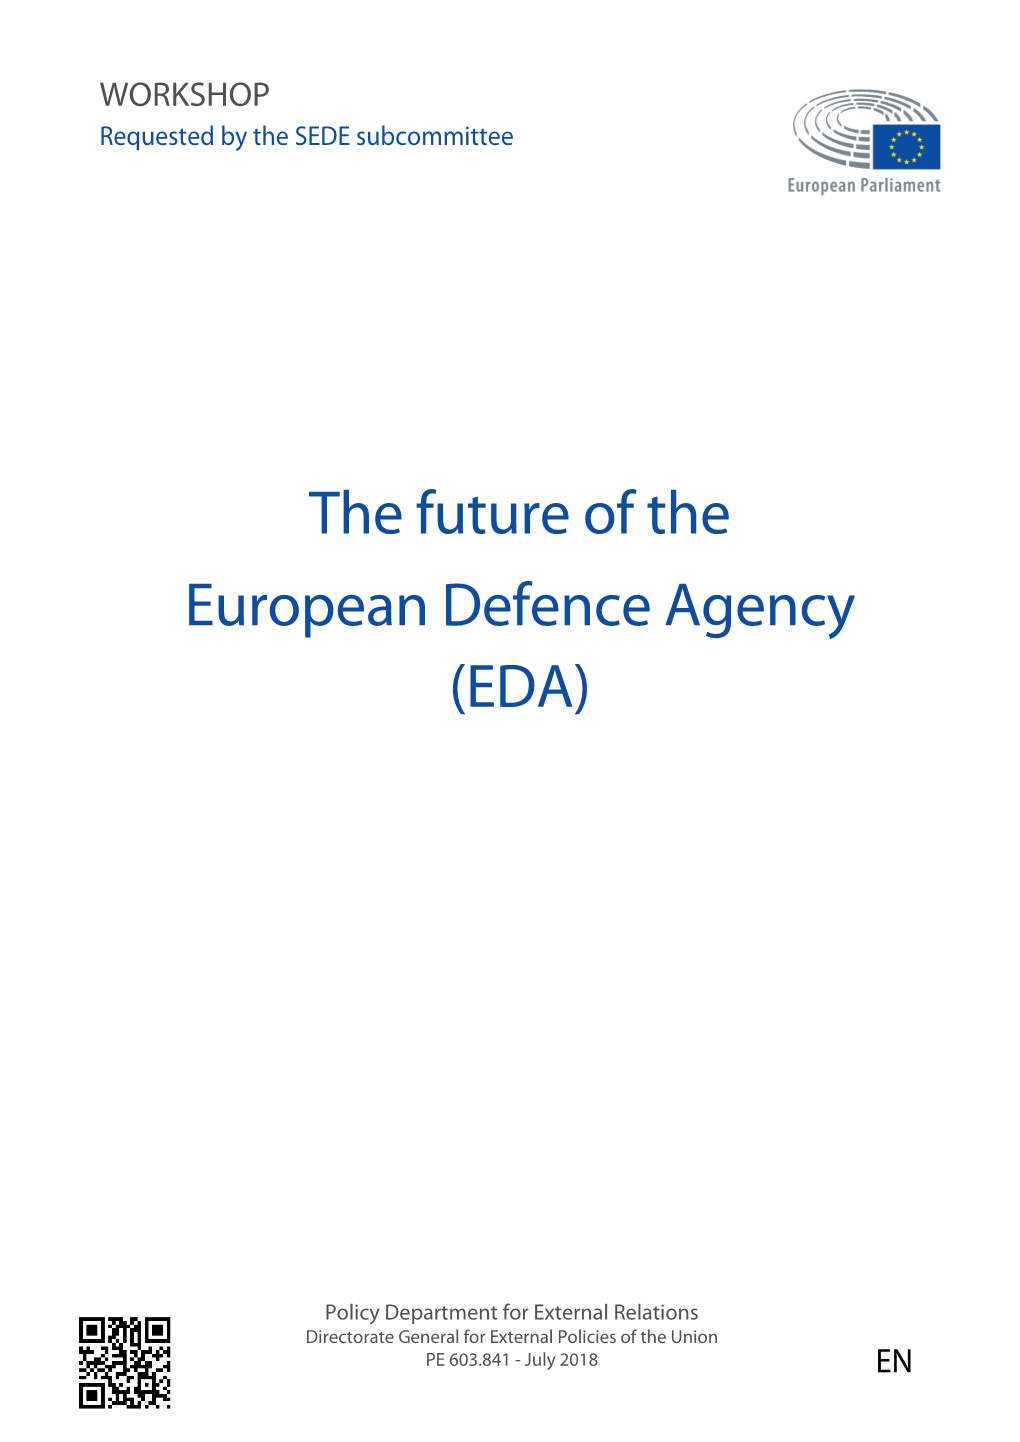 The Future of the European Defence Agency (EDA)